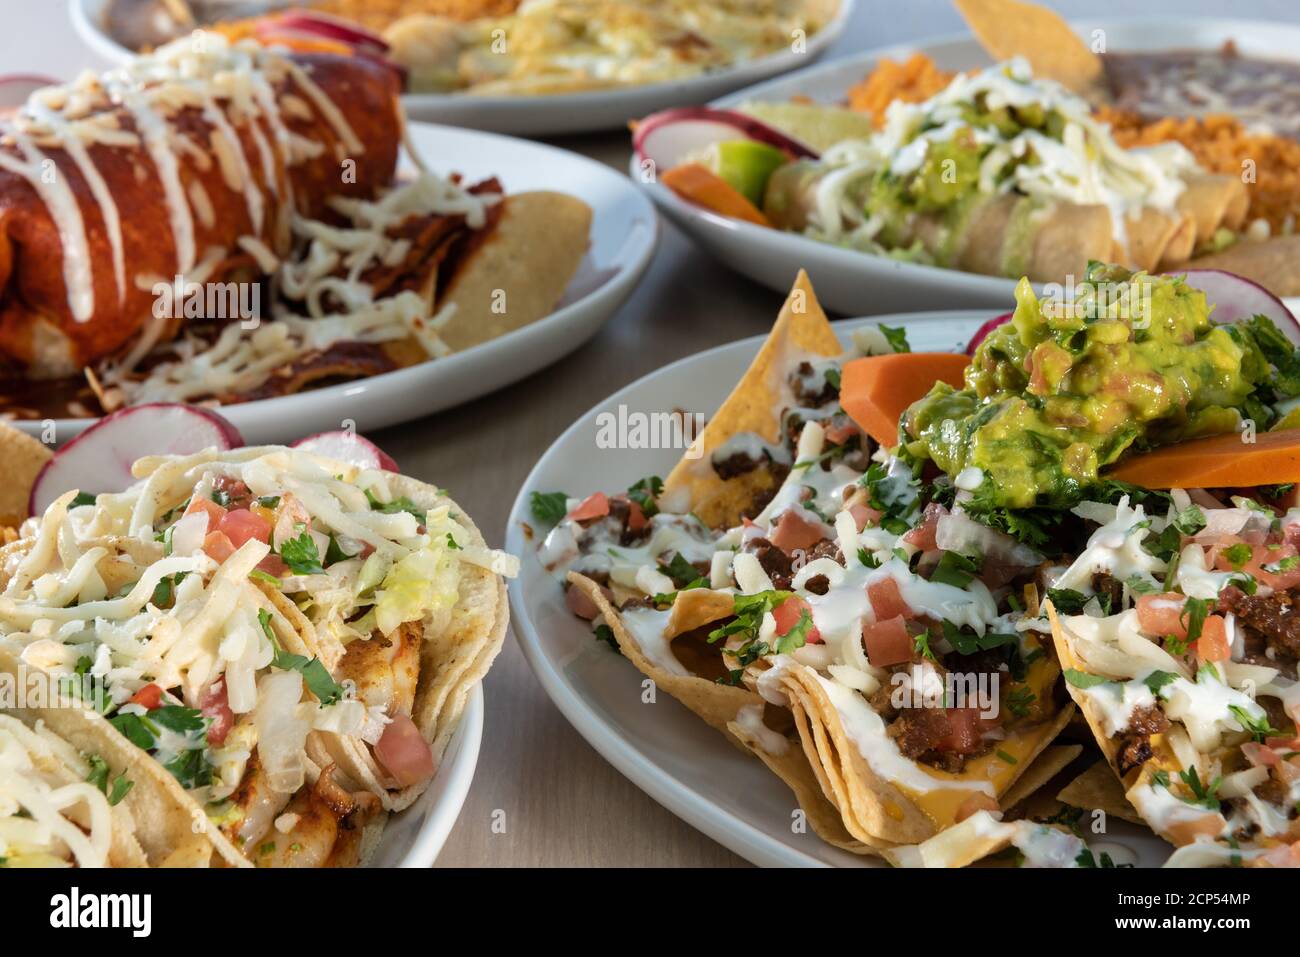 Huge selection of delicious Mexican food plates on a table buffet style for the family eating. Stock Photo